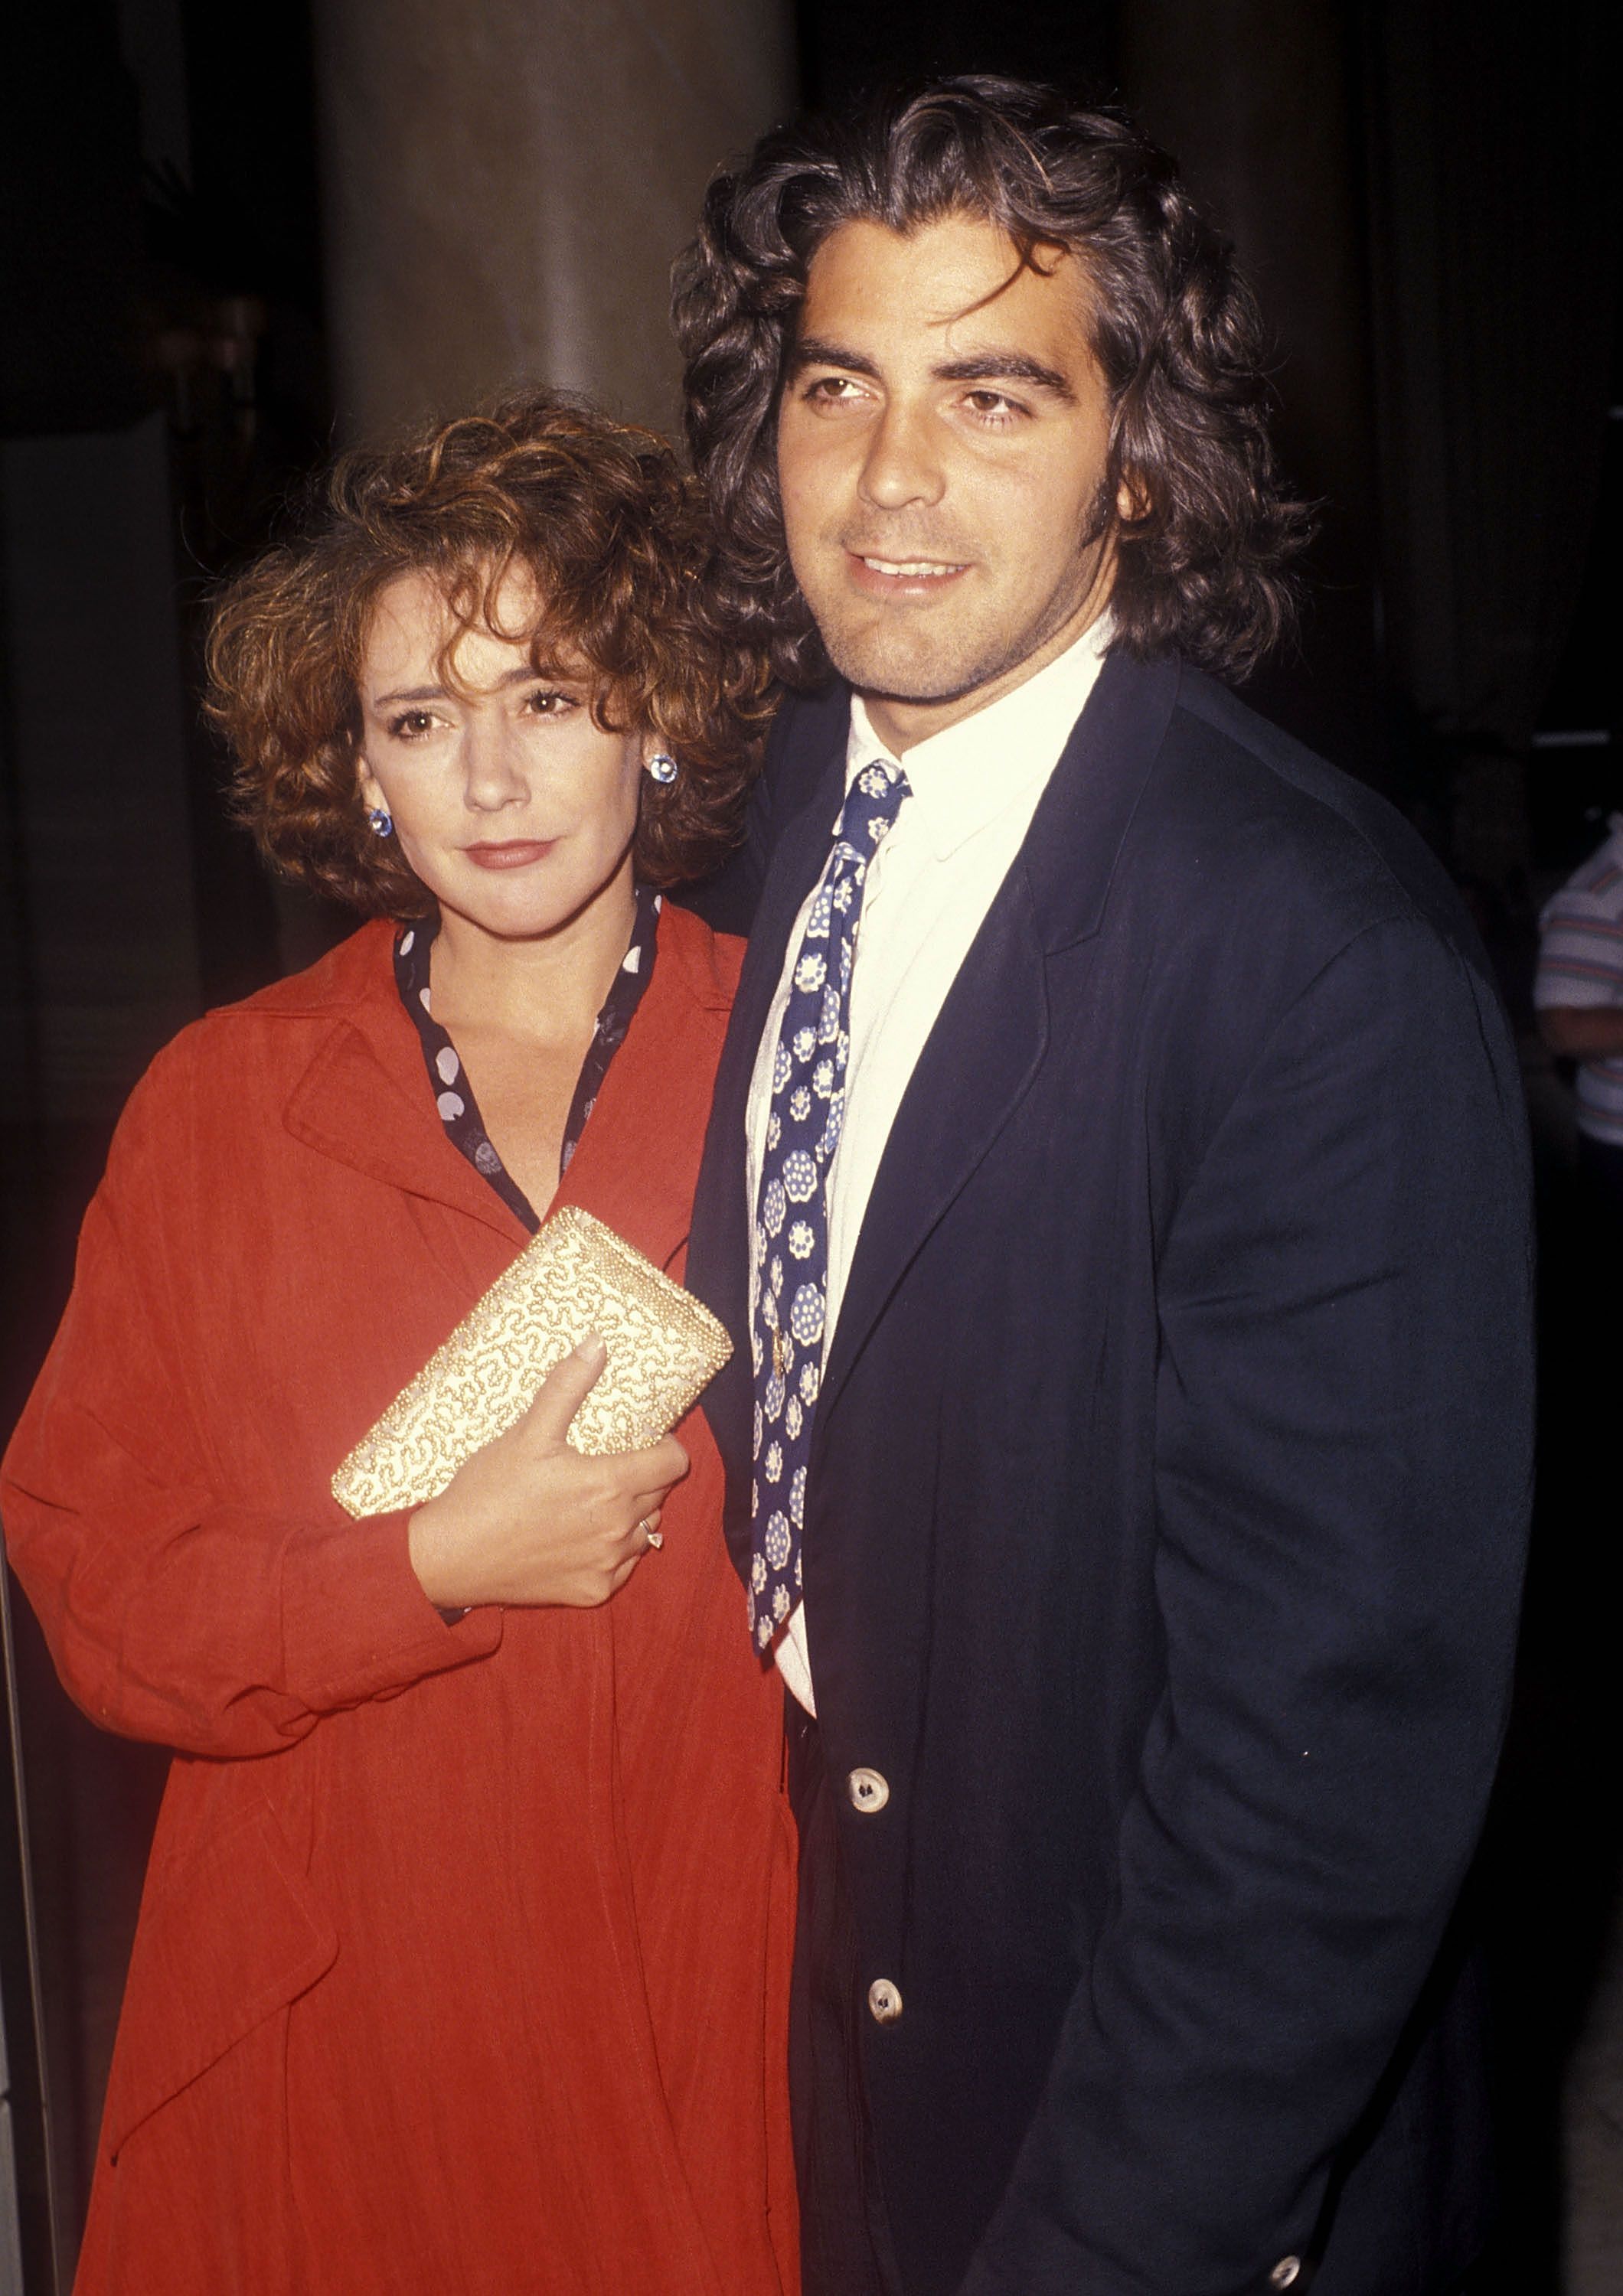 George Clooney and Talia Balsam at the ABC Television Affiliates Party in 1990 in Los Angeles, California | Source: Getty Images